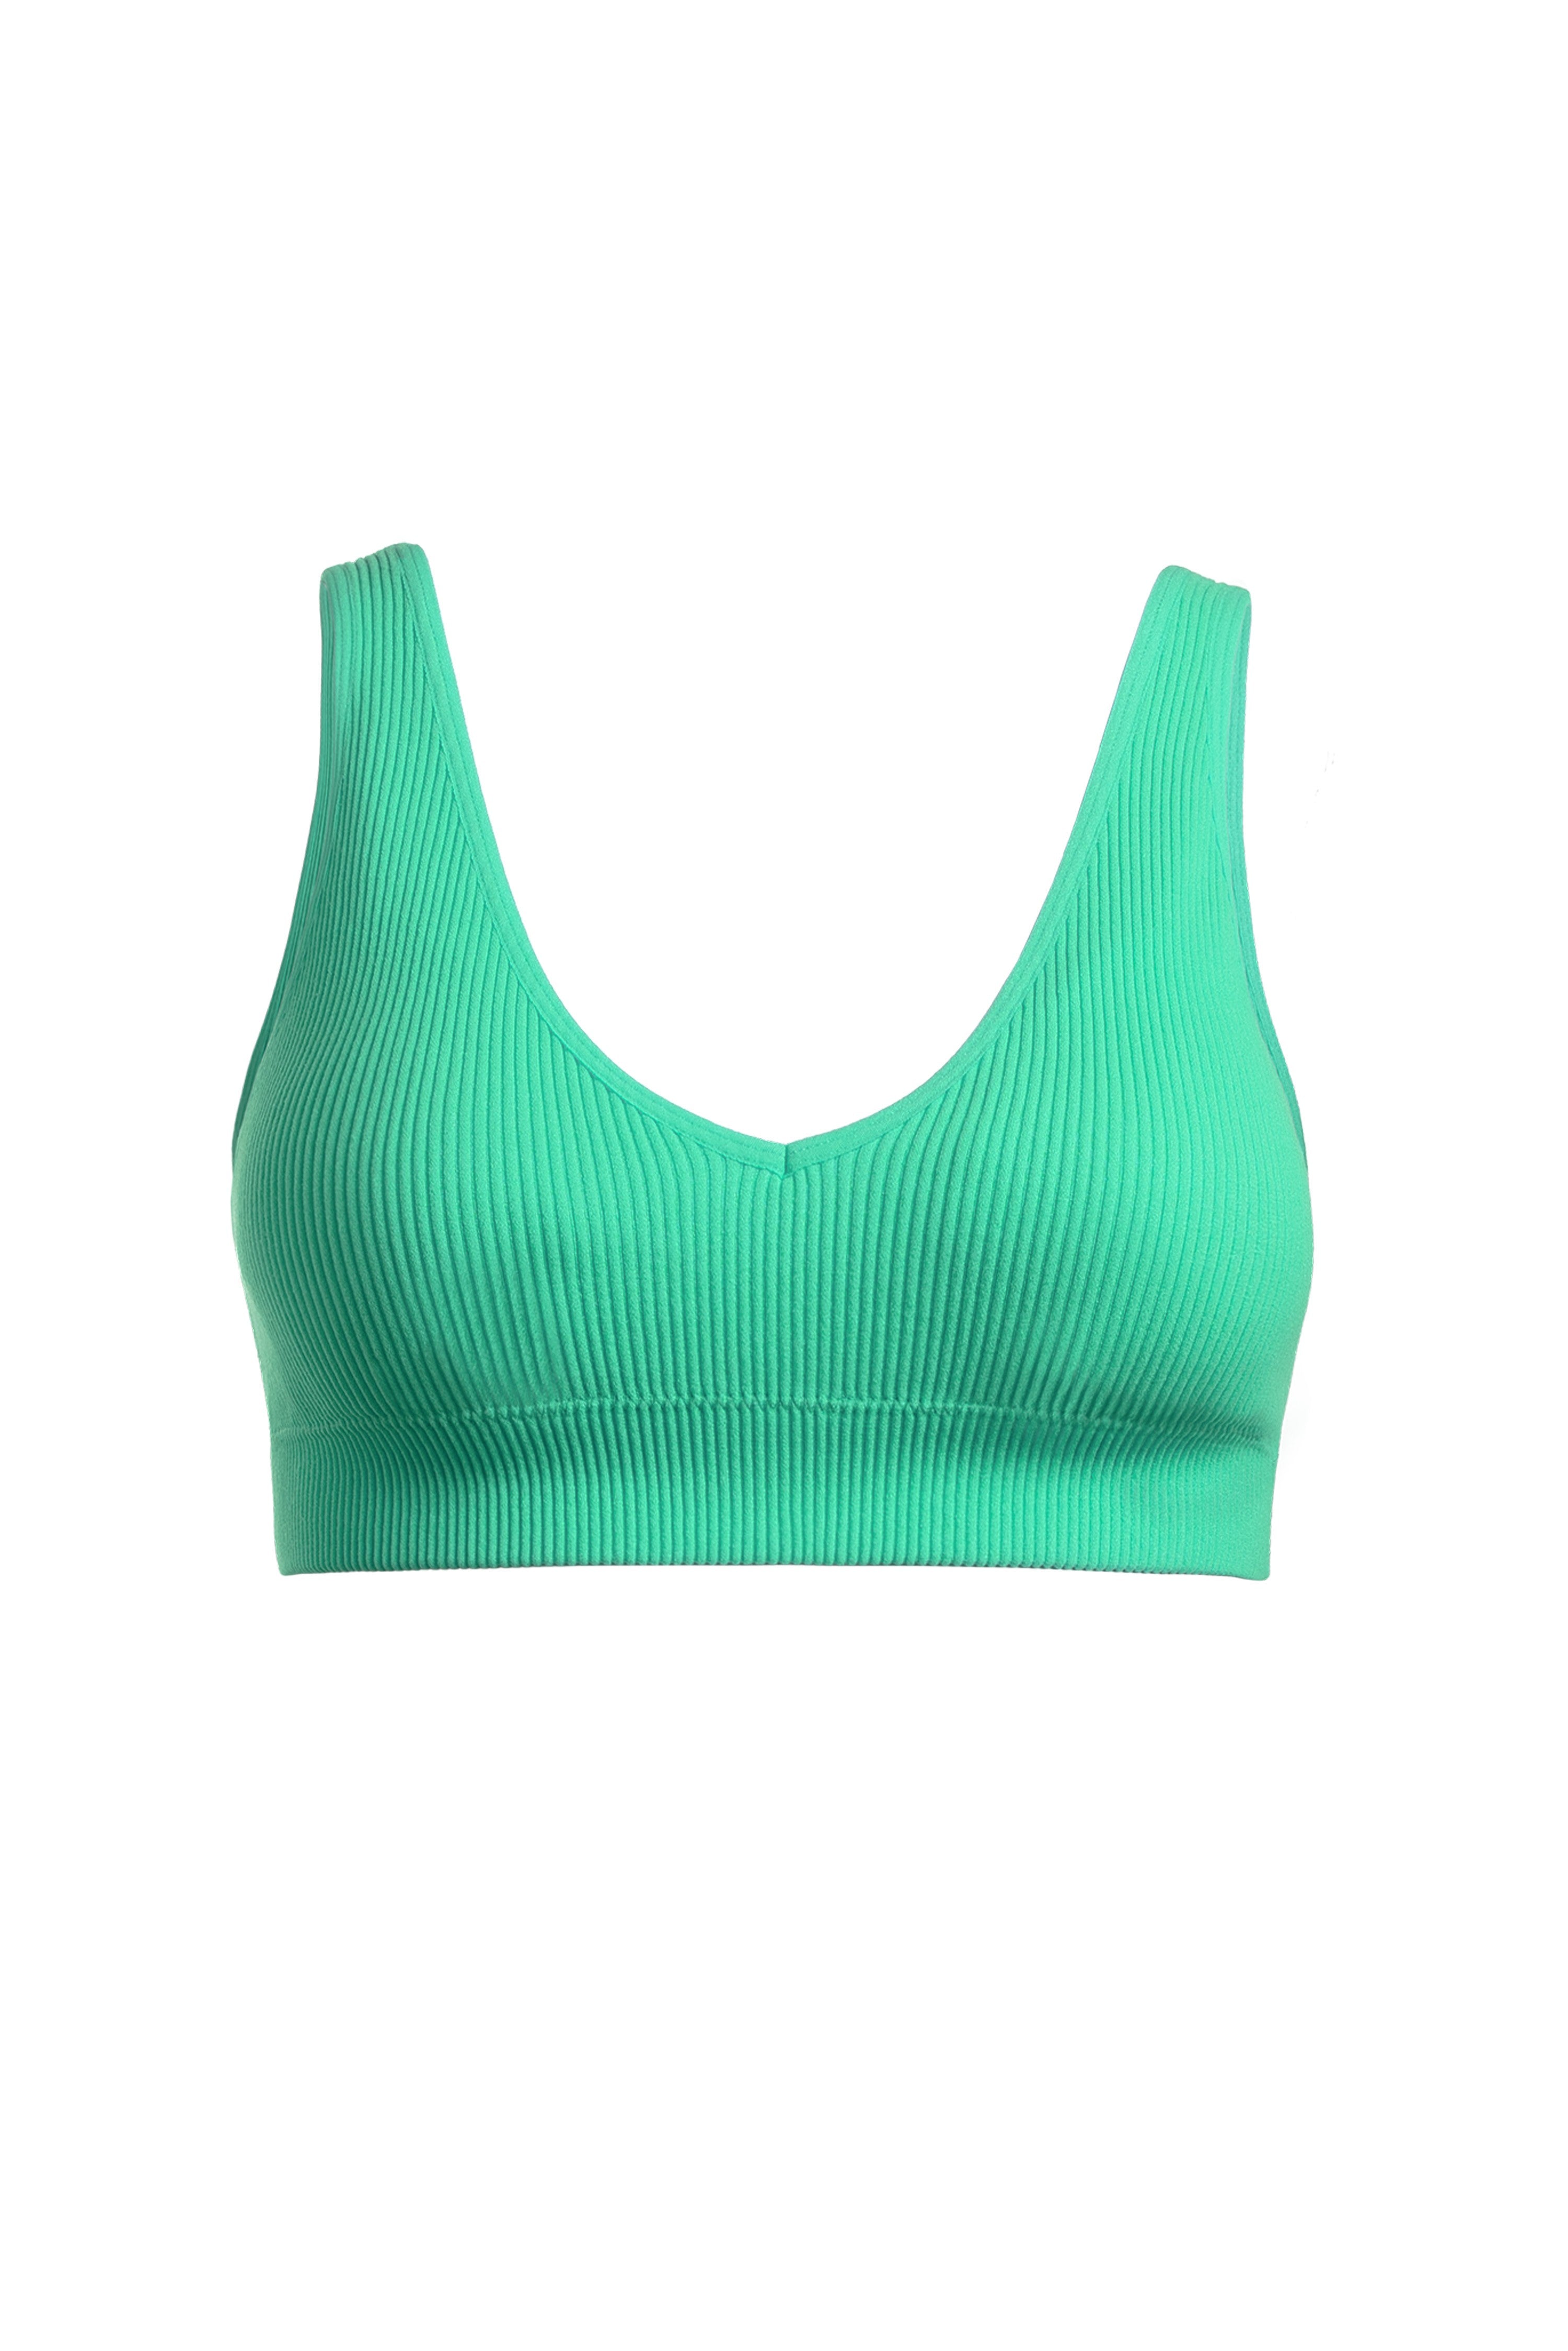 Kelly Green Padded Rib Bralette | Collective Request 